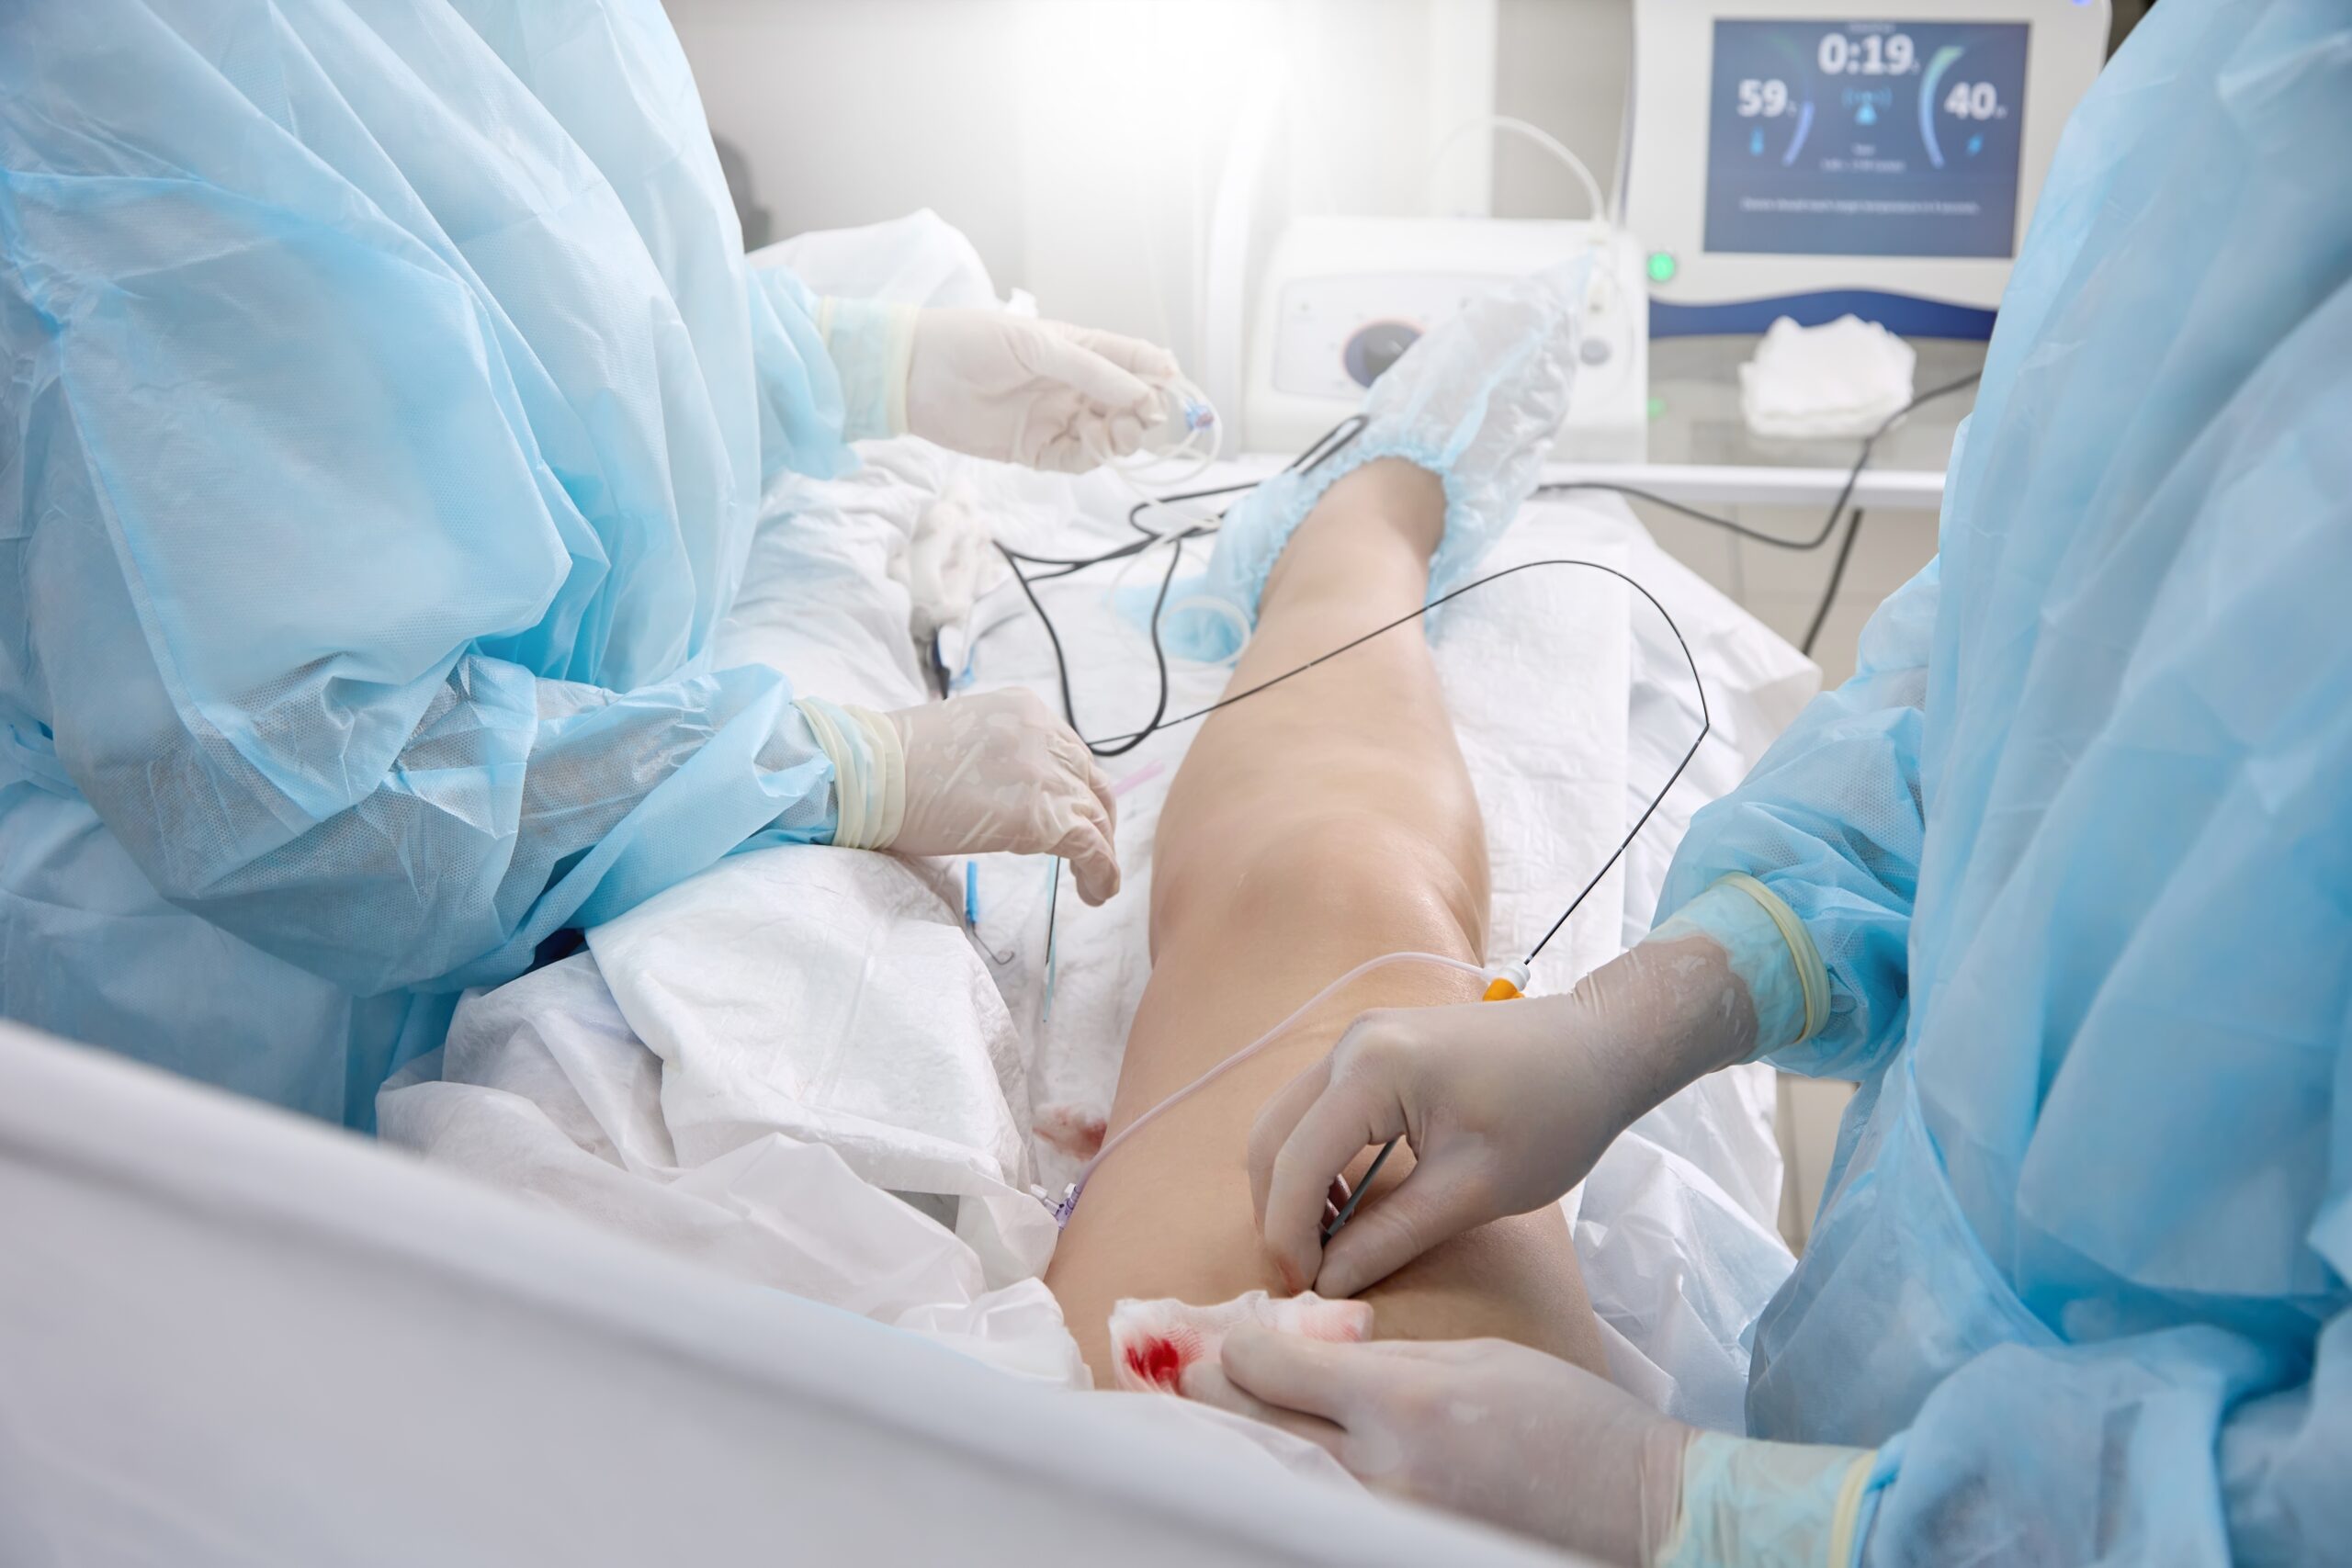 A patient receiving vein ablation treatment in an operating room with doctors.